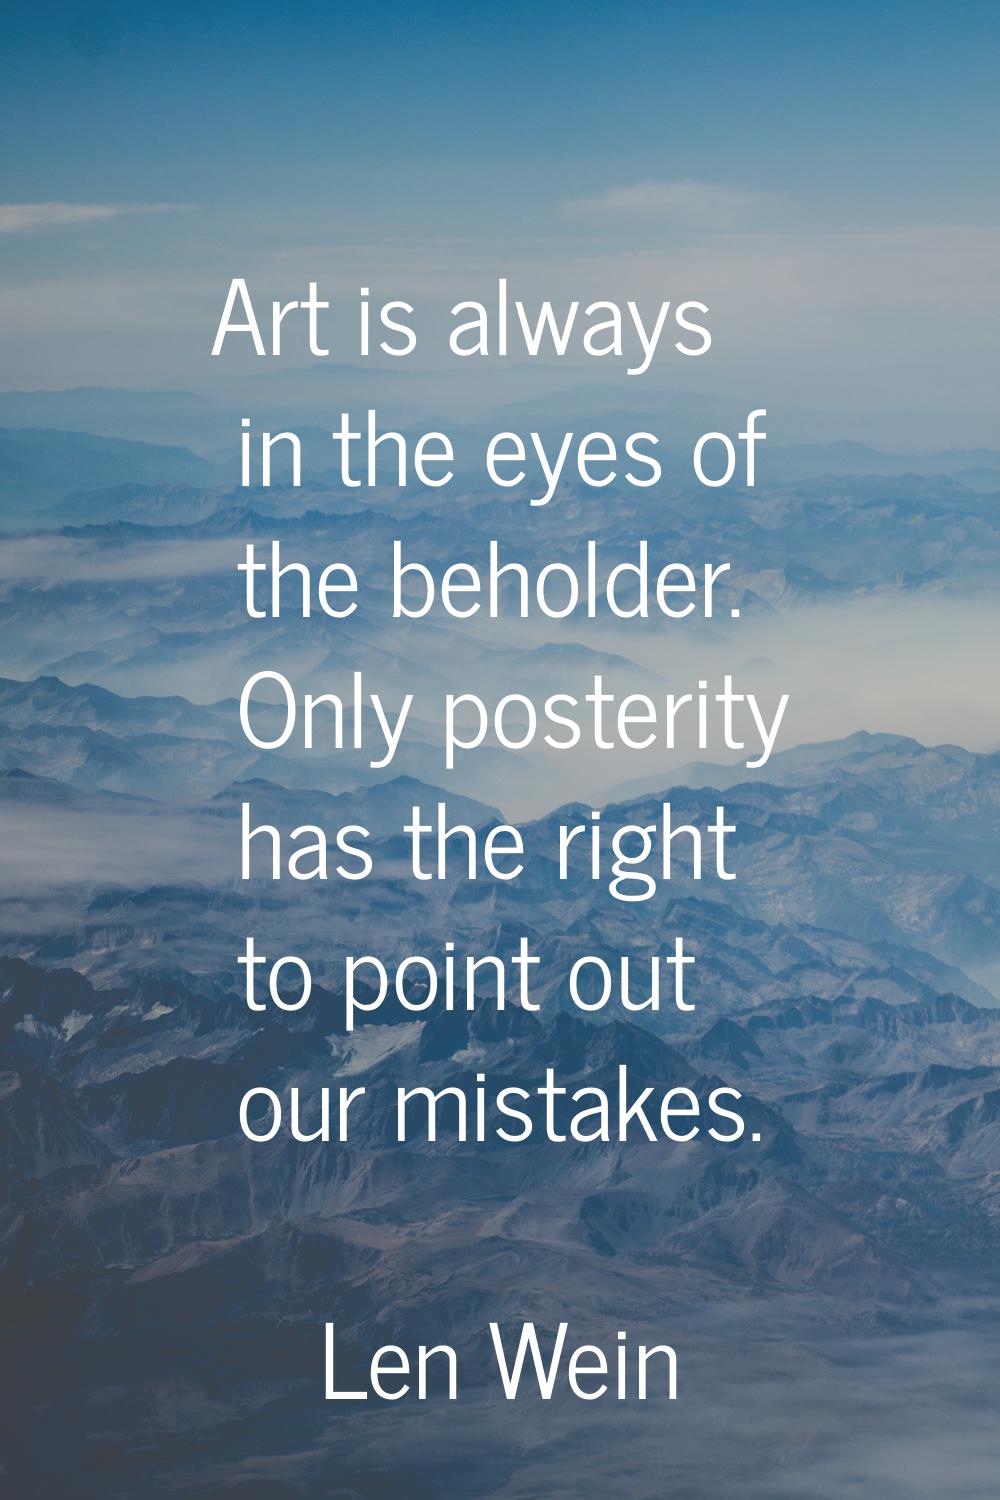 Art is always in the eyes of the beholder. Only posterity has the right to point out our mistakes.